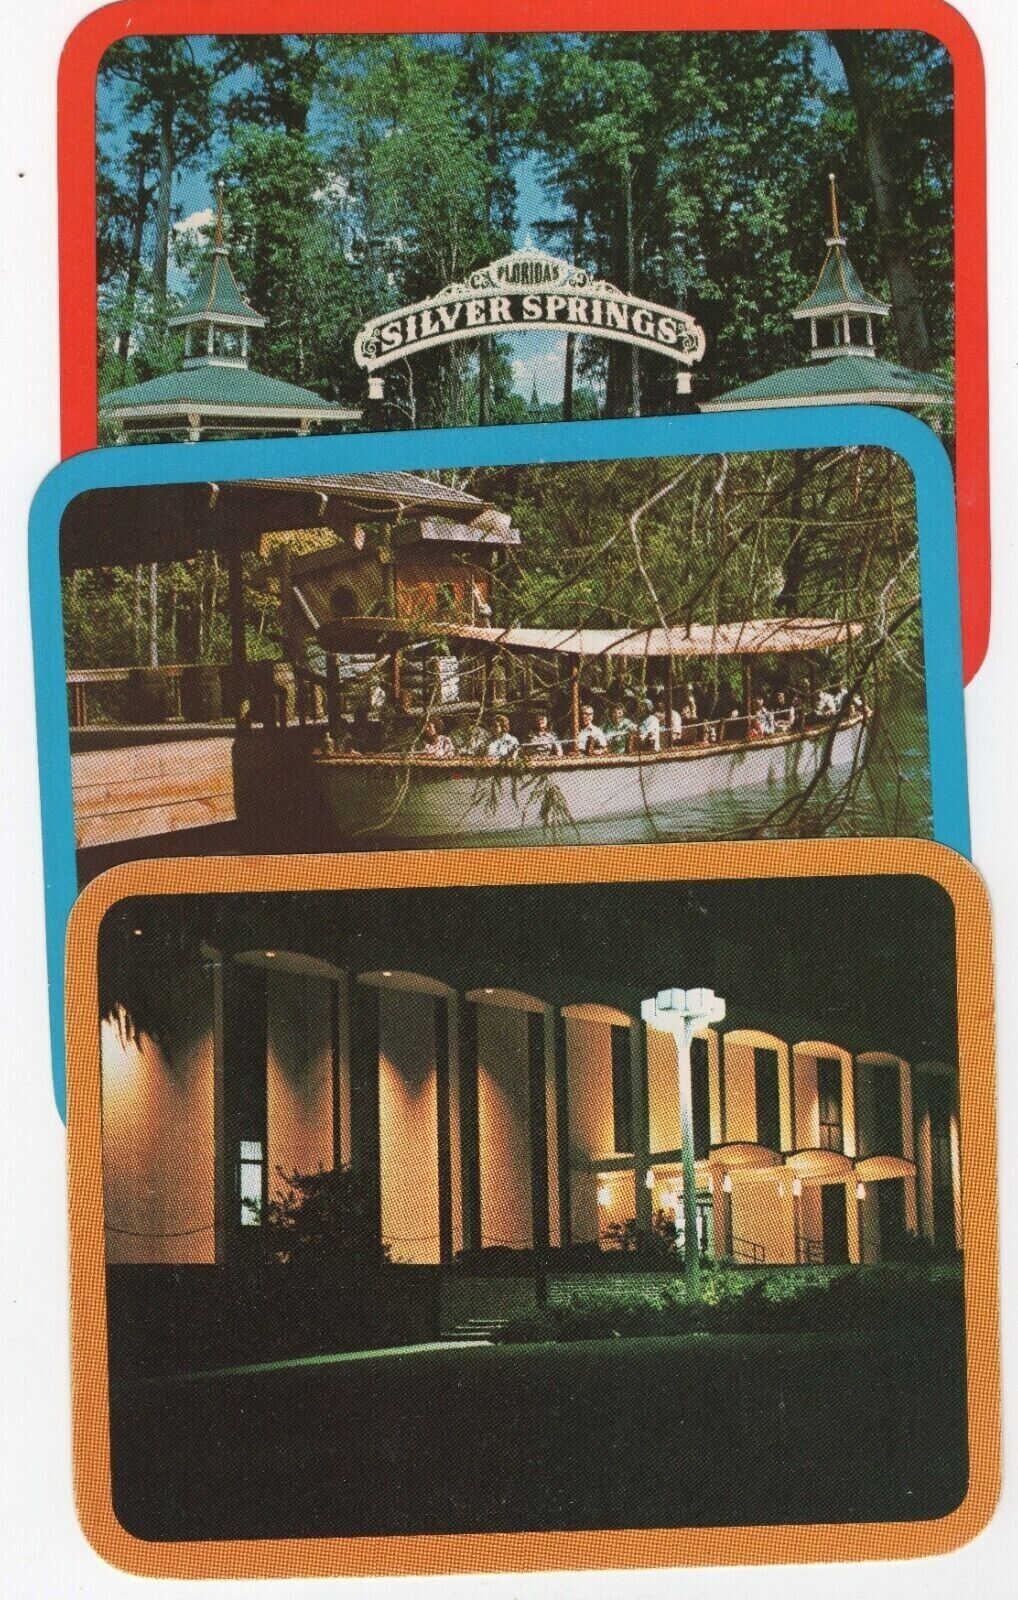 Ocala City Hall/Silver Springs Florida Postcards 6.75 by 5.25 Inches Set of 3